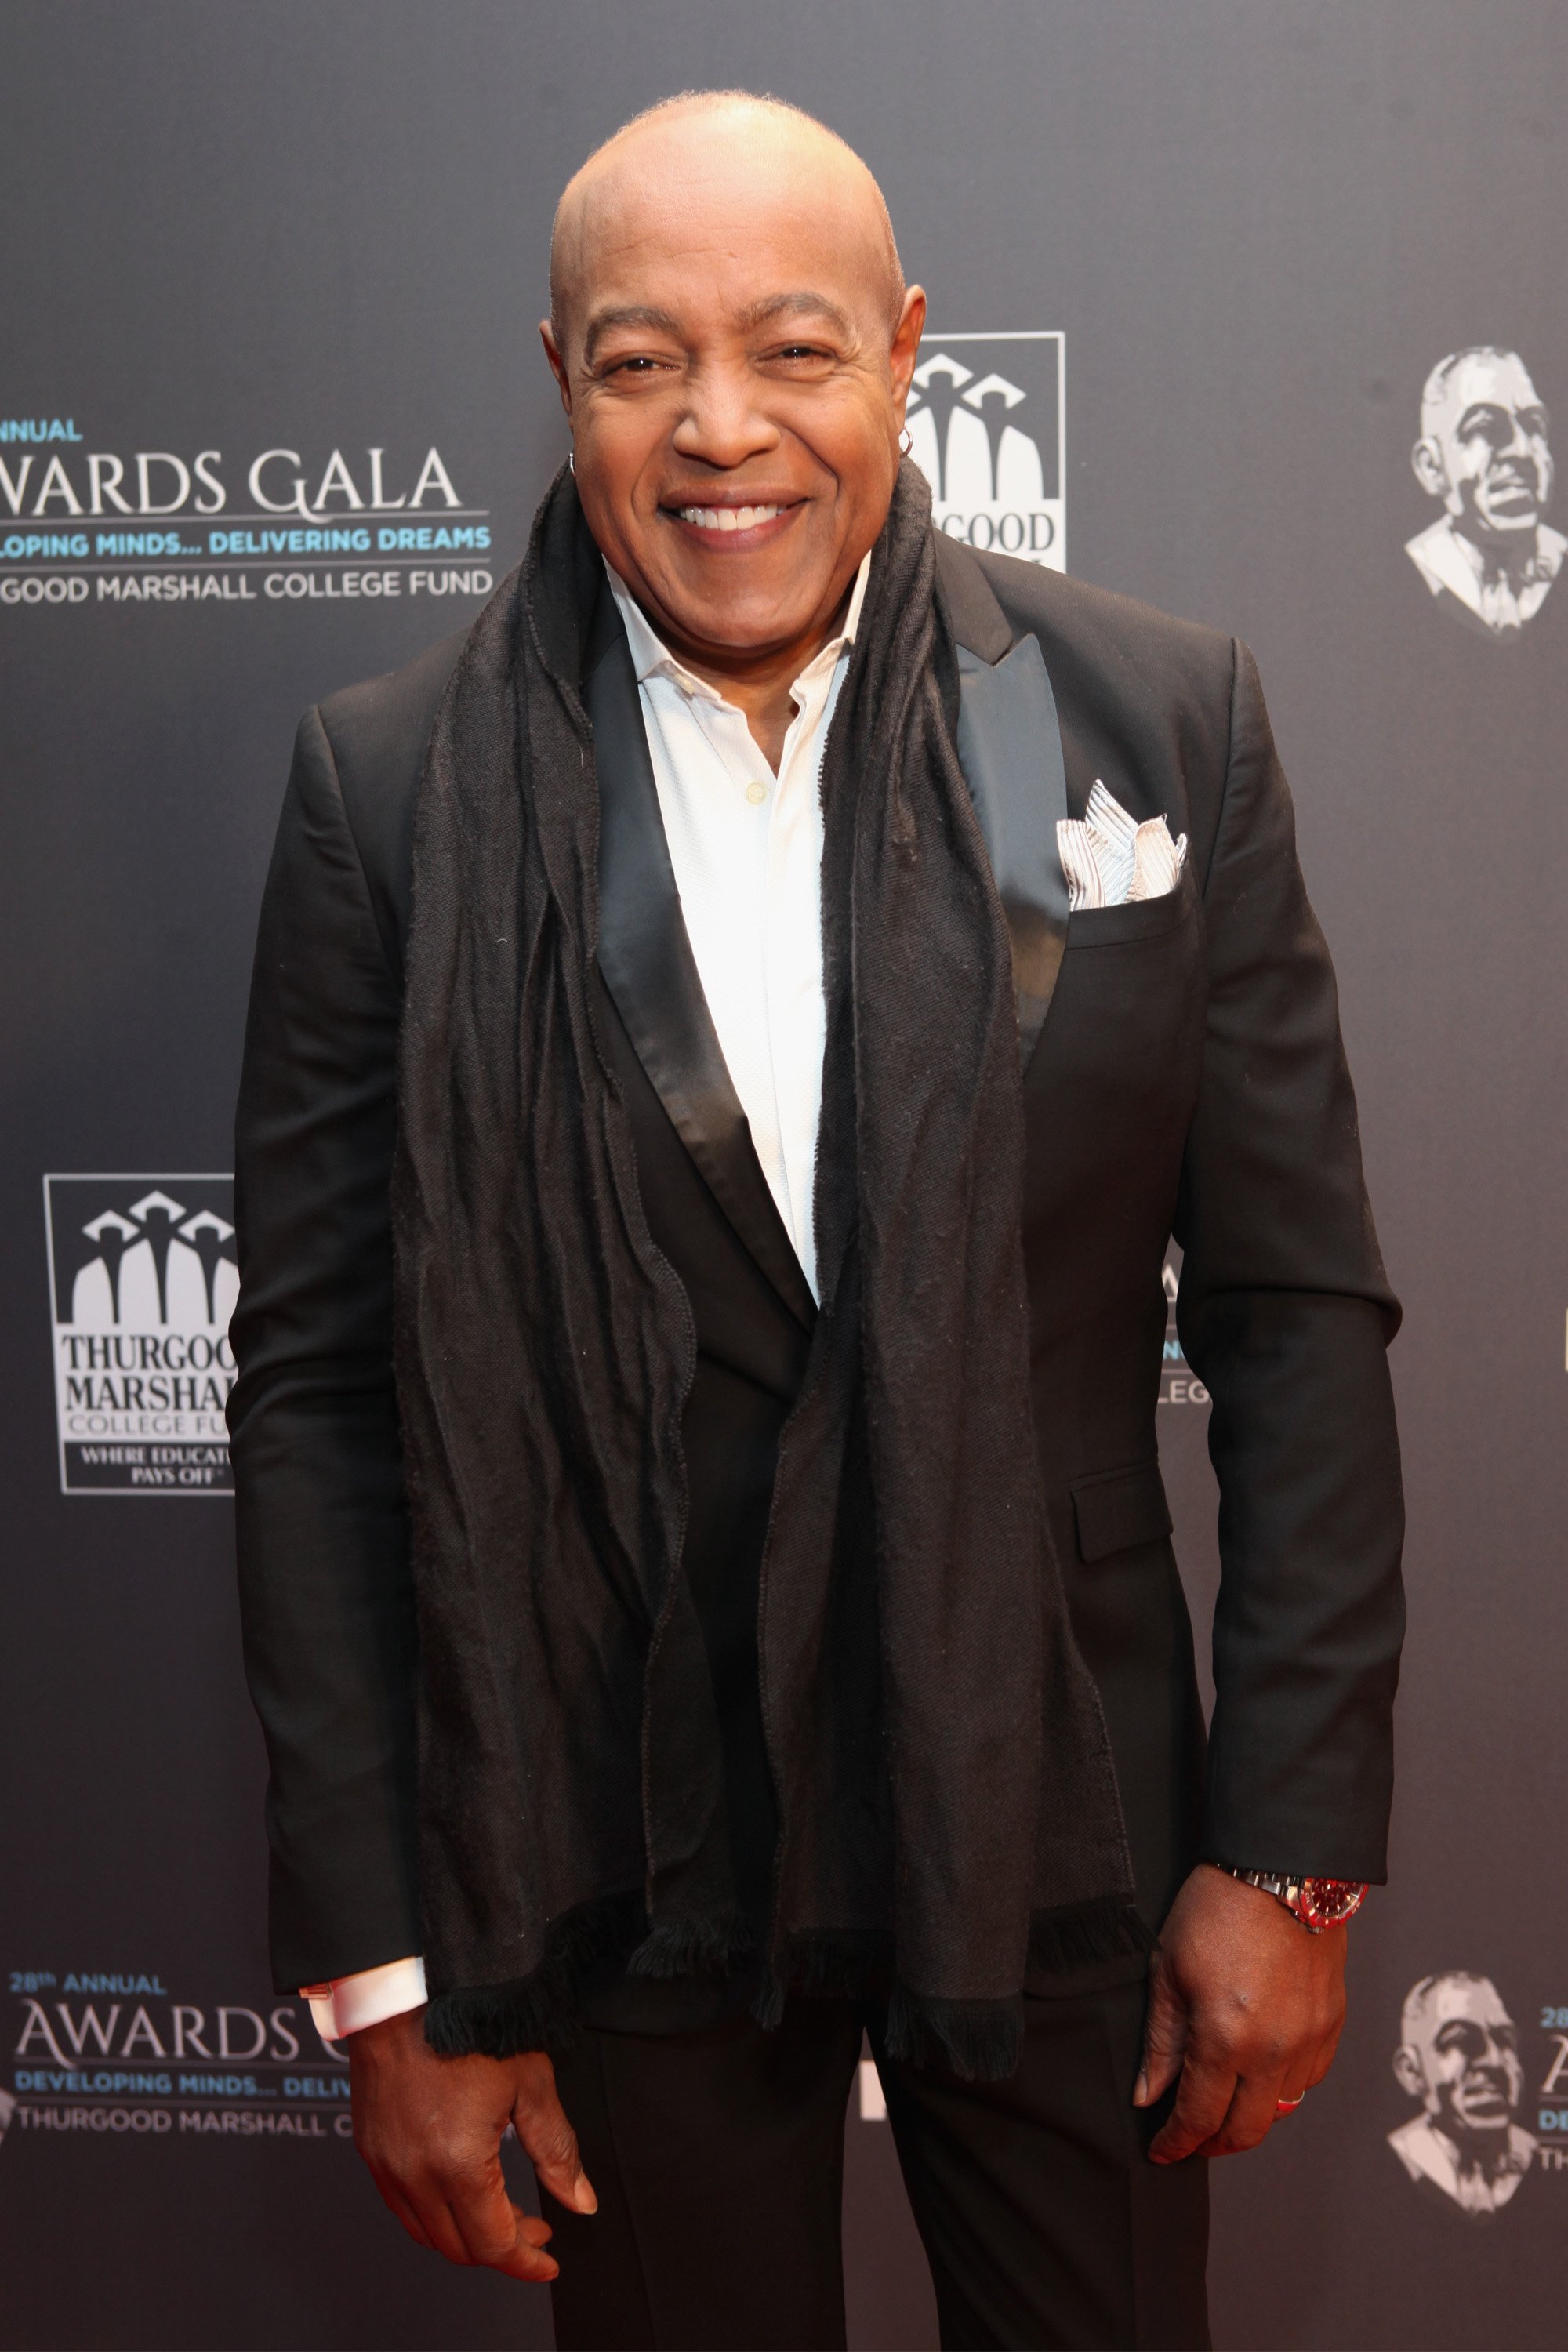  Peabo Bryson attends the Thurgood Marshall College Fund 28th Annual Awards Gala at Washington Hilton on November 21, 2016 in Washington, DC | Photo: GettyImages